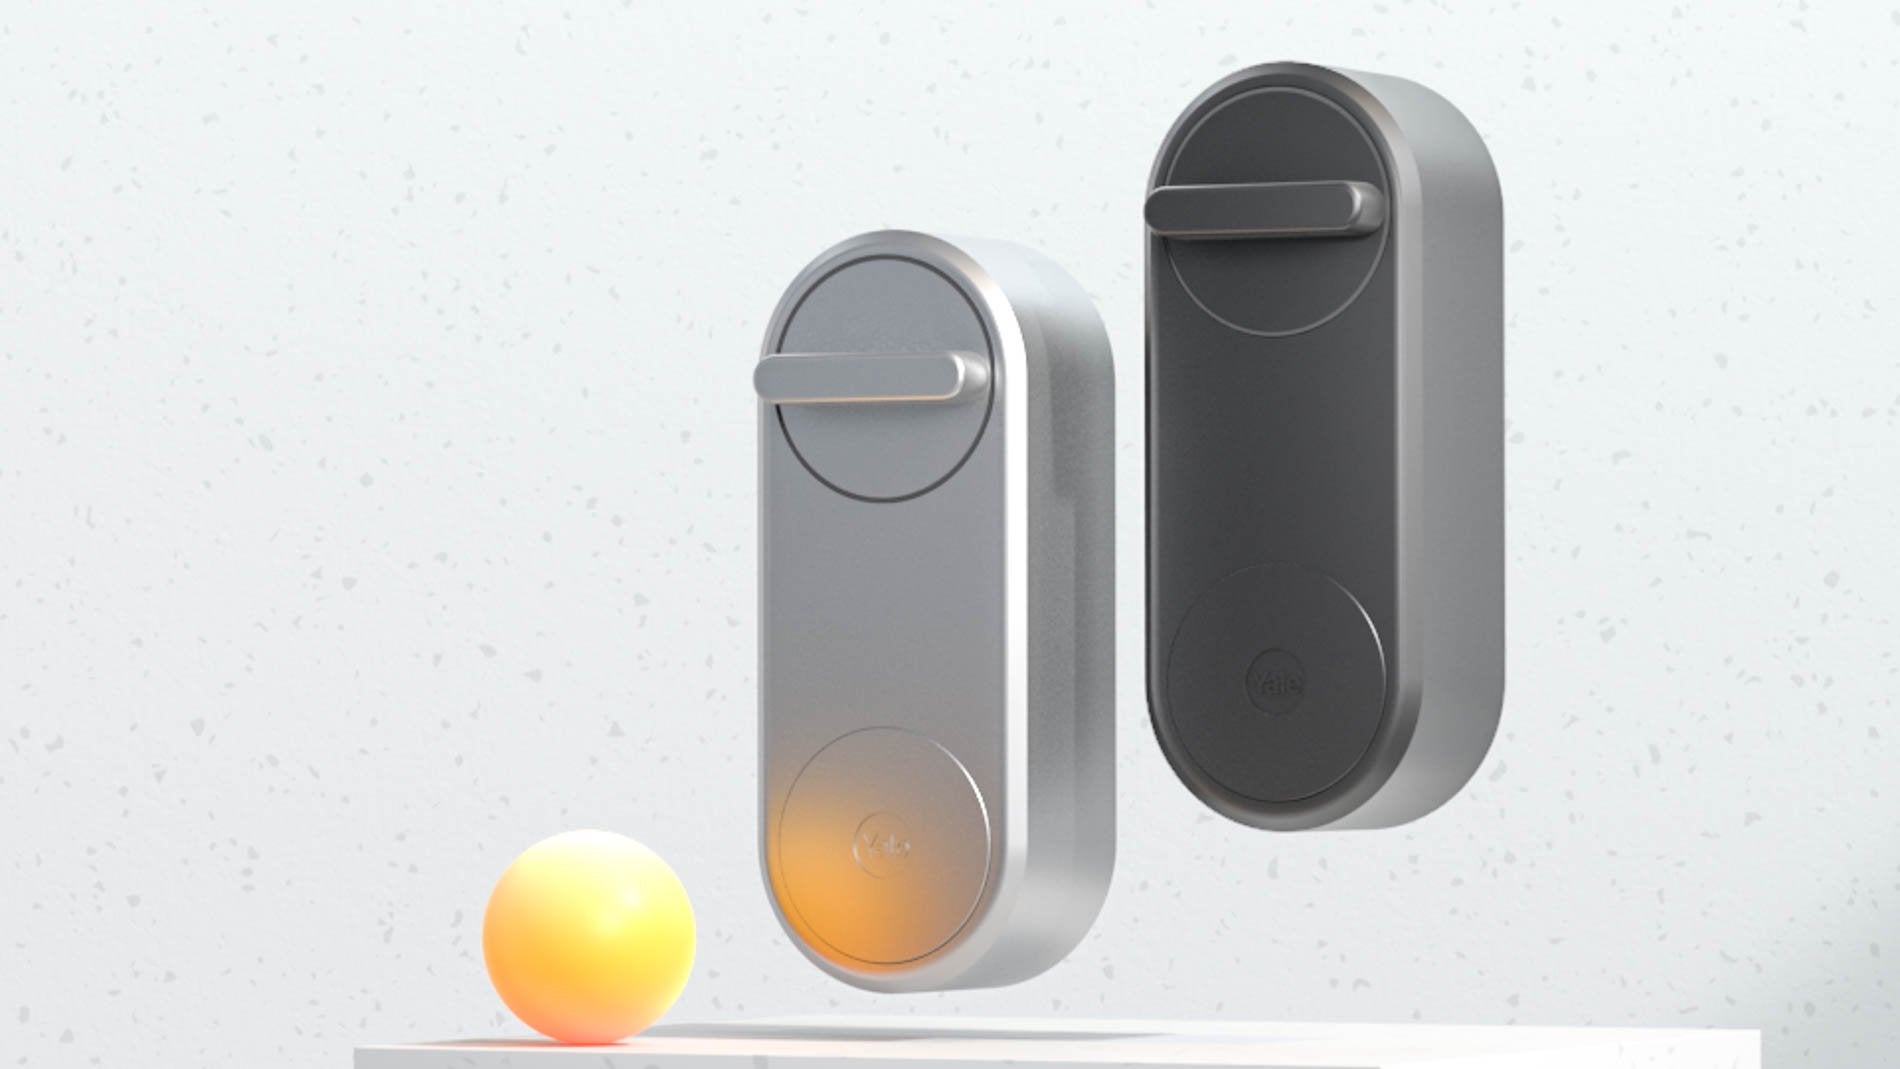 Yale Linus HomeKit smart lock available from October